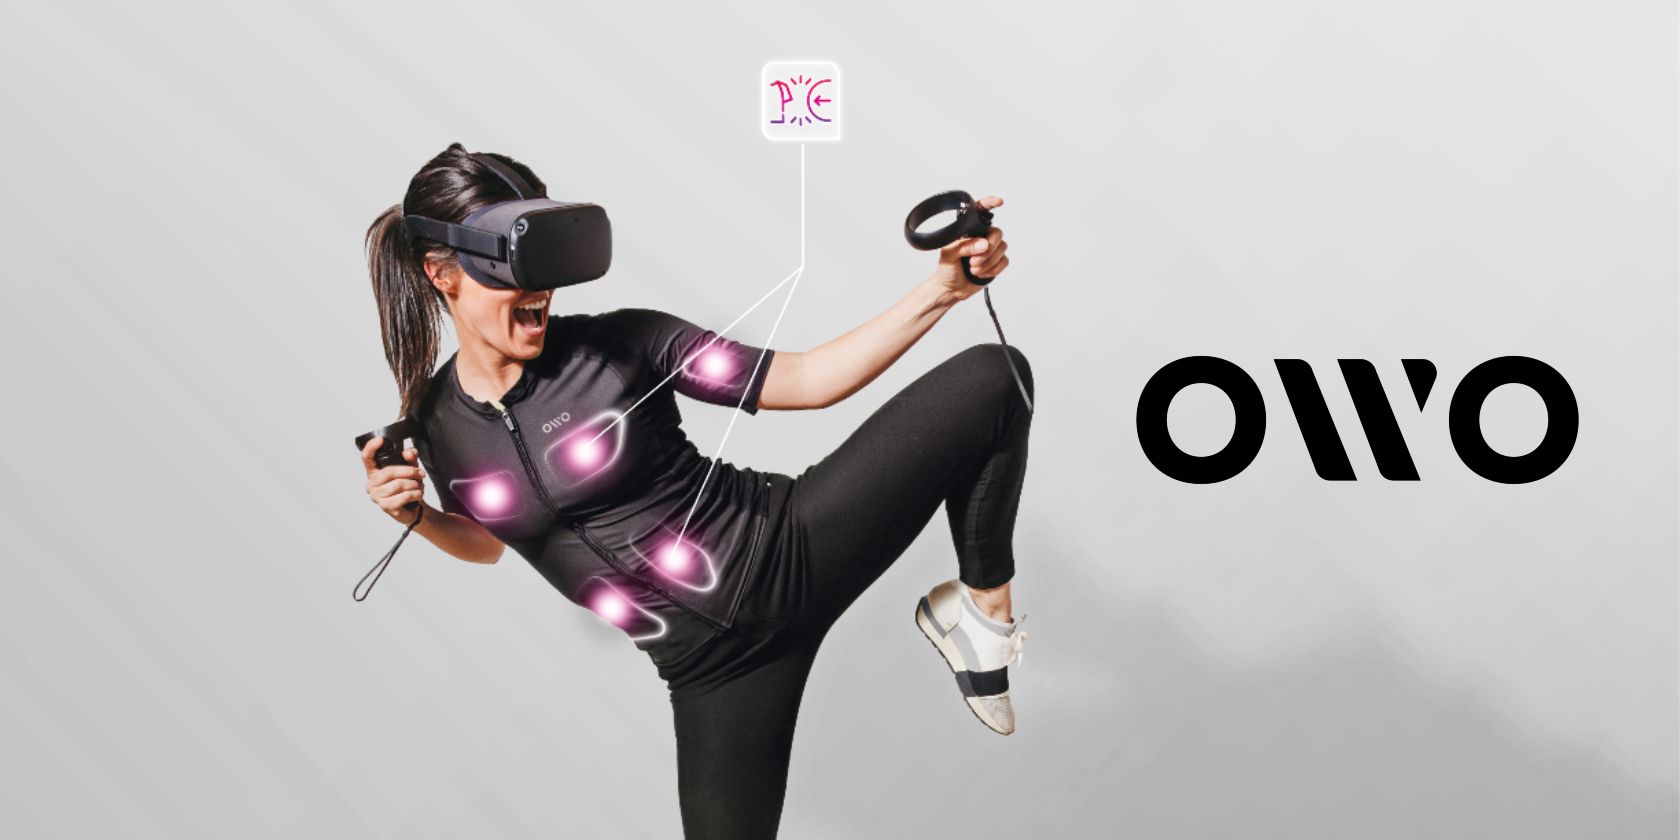 OWO haptic vest black in use with vr headset and logo